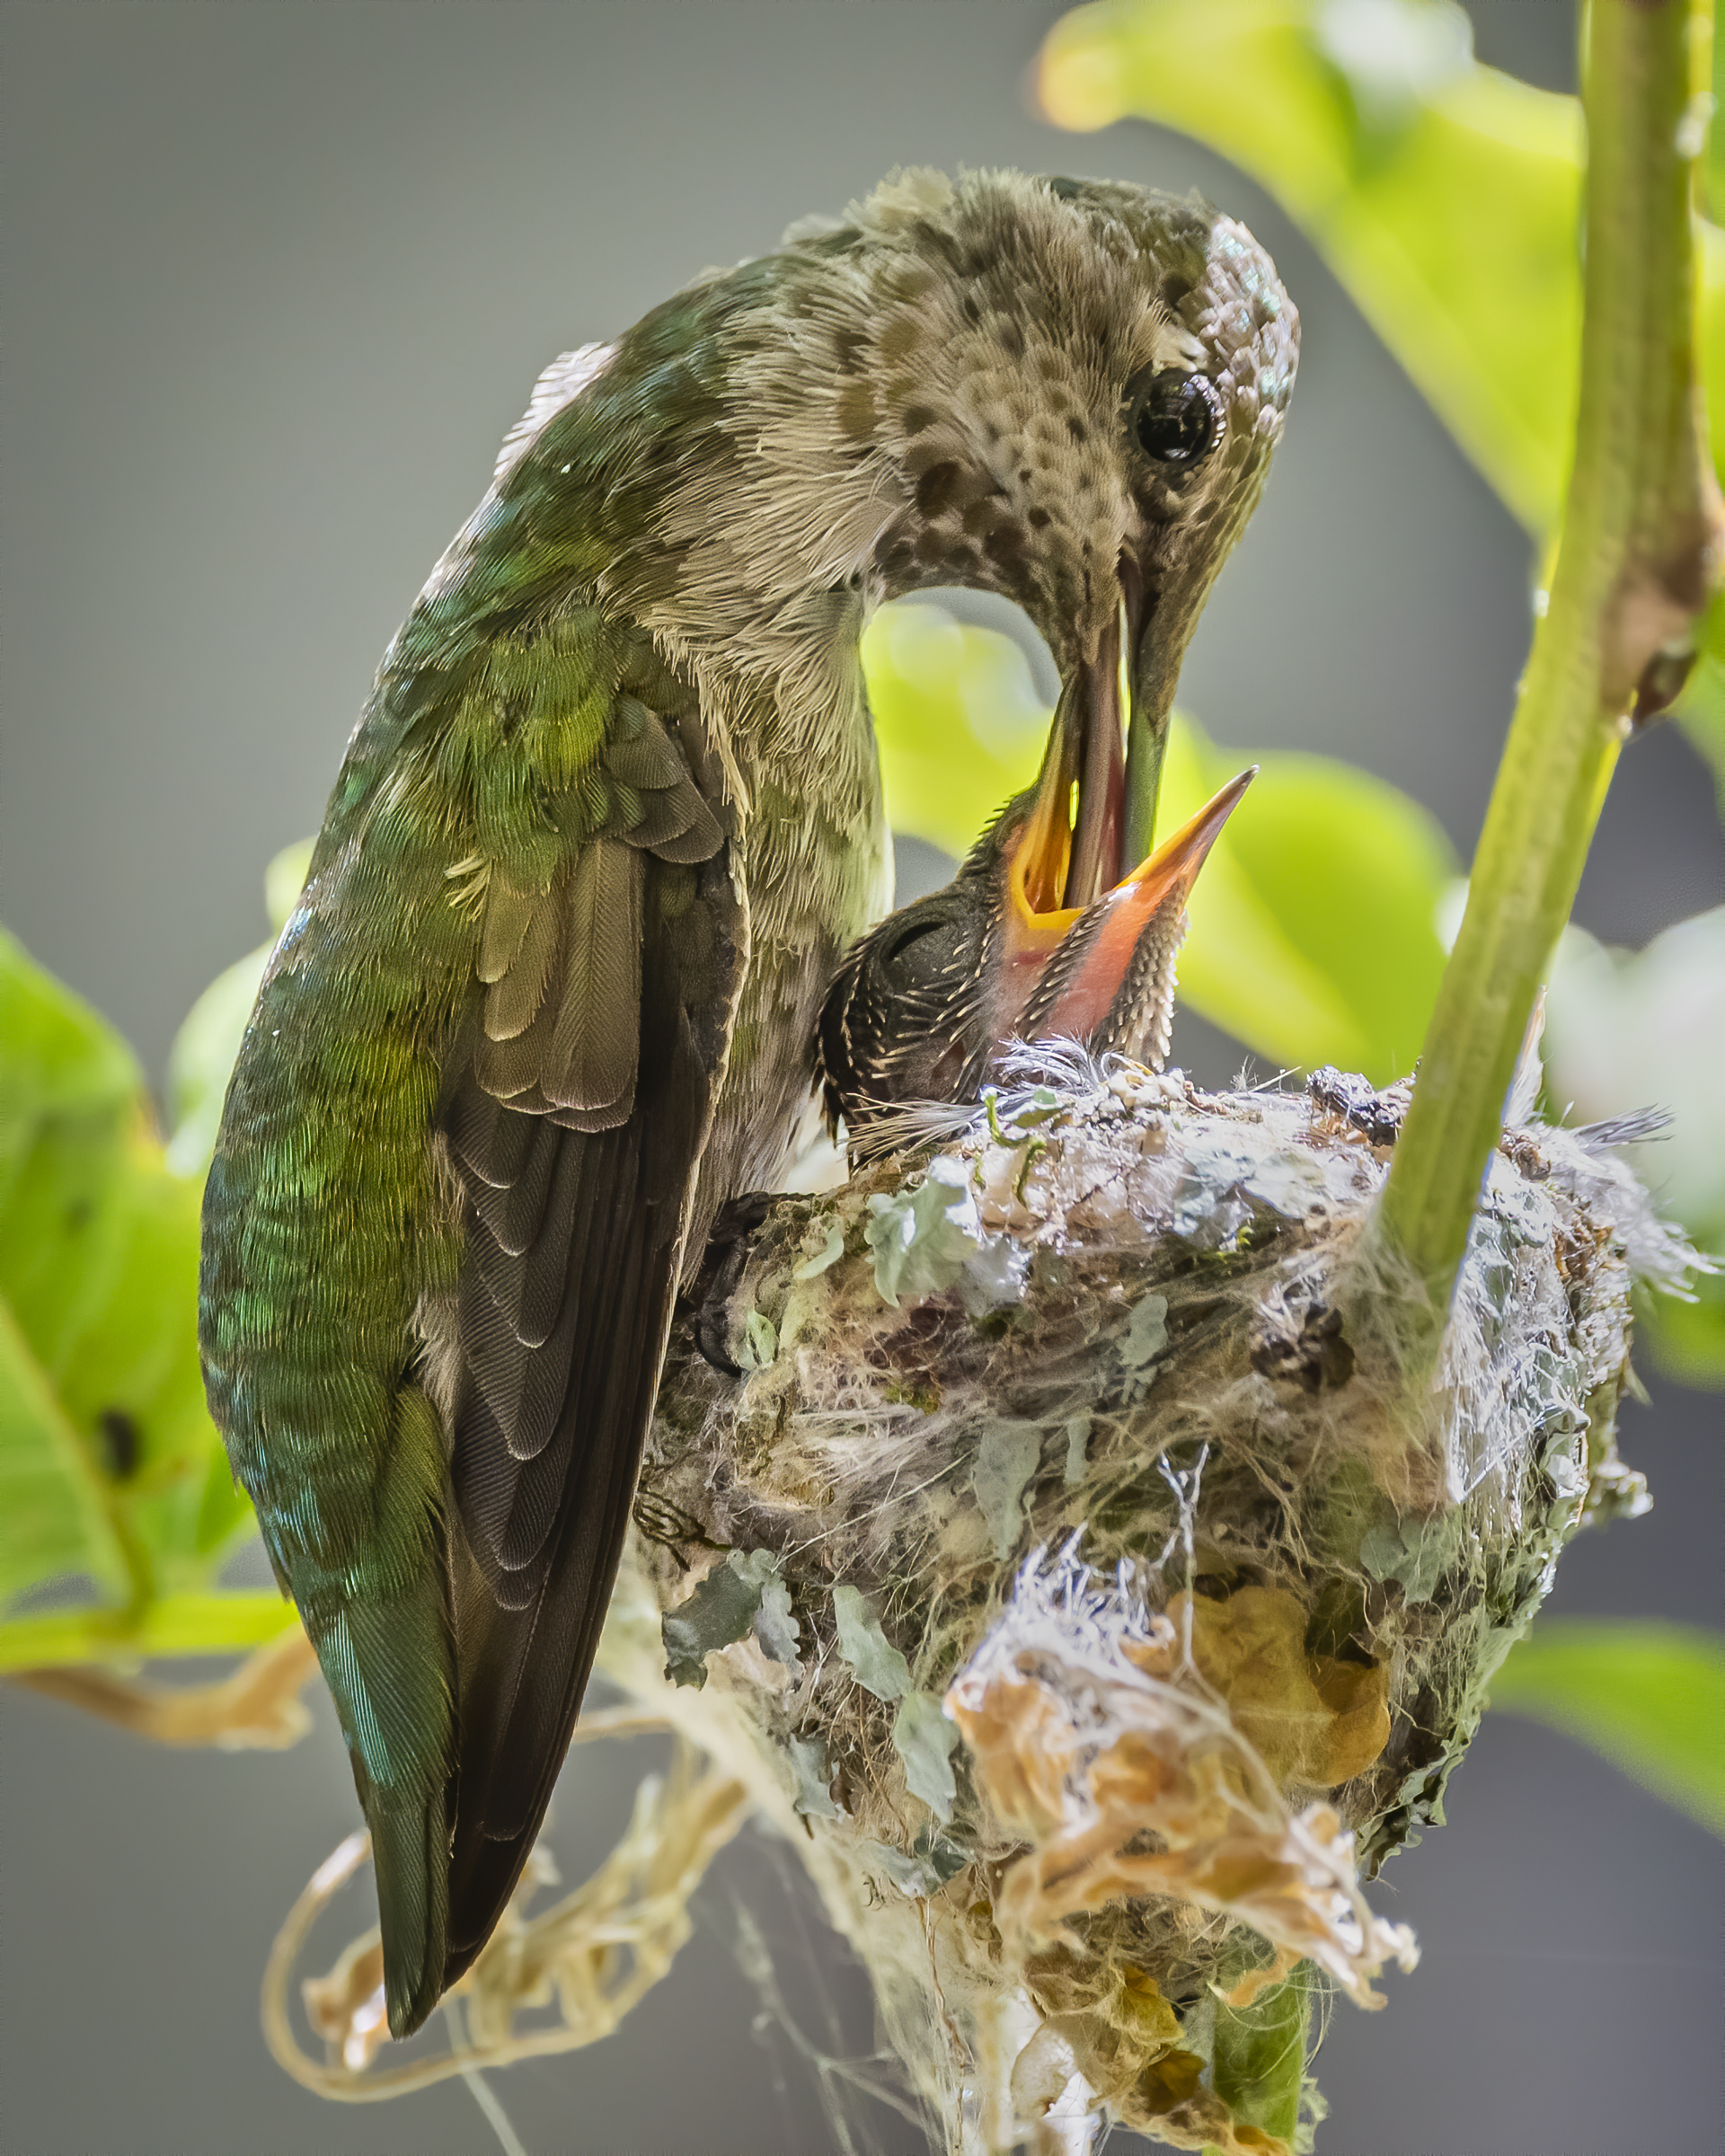 An Anna's Hummingbird feeds her newly hatched little one. This was taken from a distance.
Nikon D500, Tamron 150-600, 1/40...